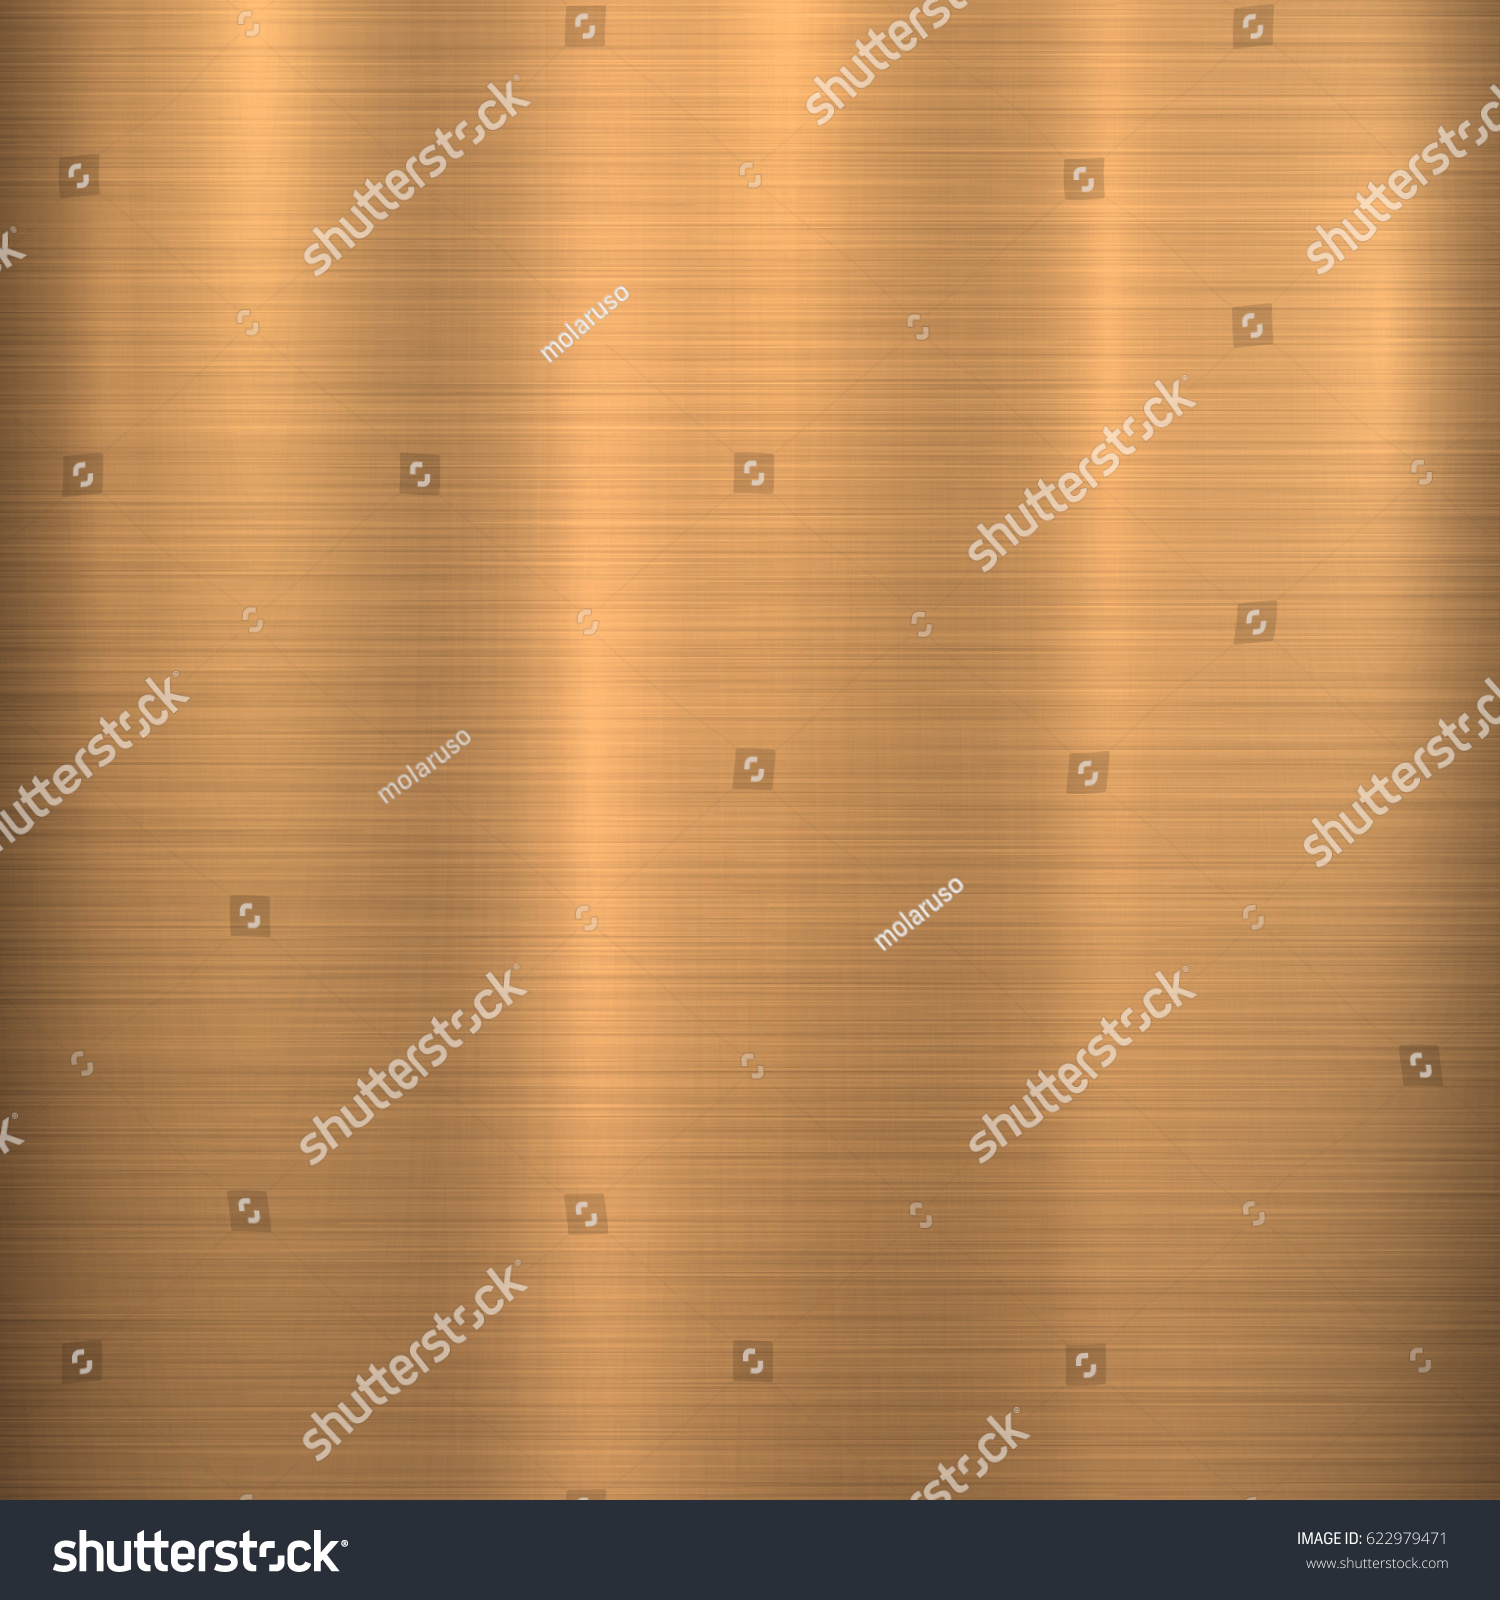 Bronze Metal Technology Background Polished Brushed Stock Vector Royalty Free